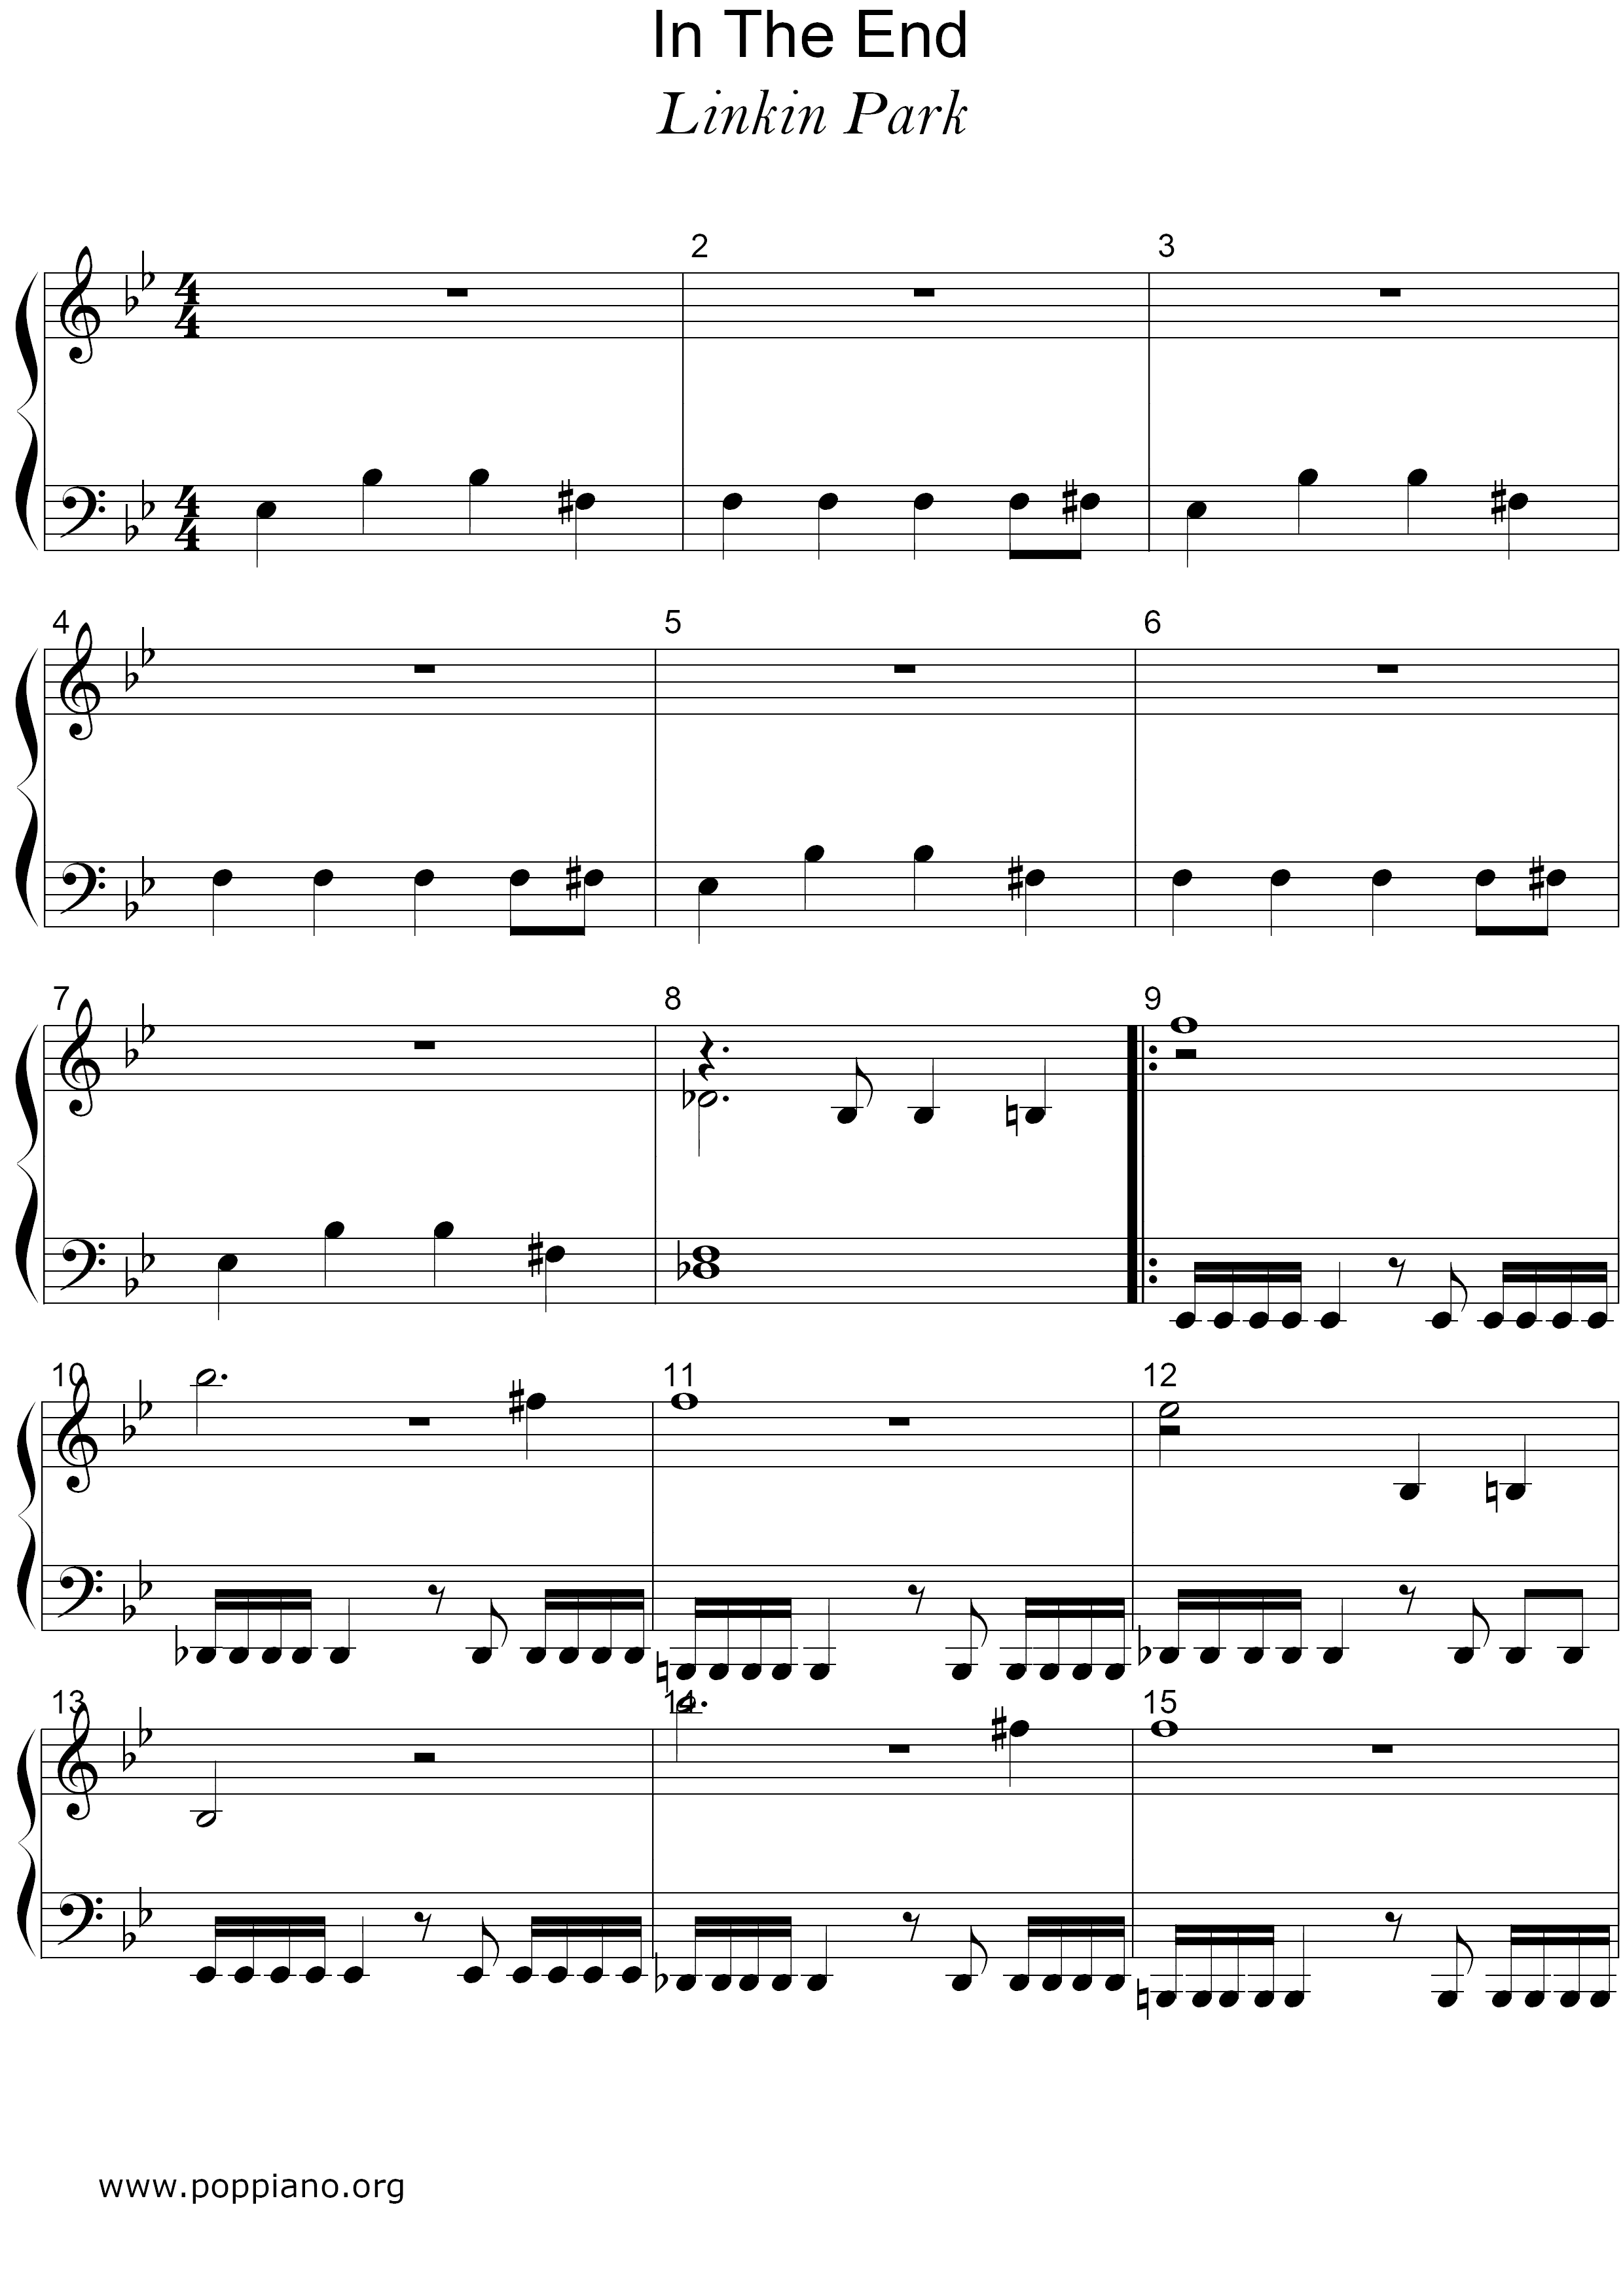 In The End by Linkin Park - Guitar Lead Sheet - Guitar Instructor